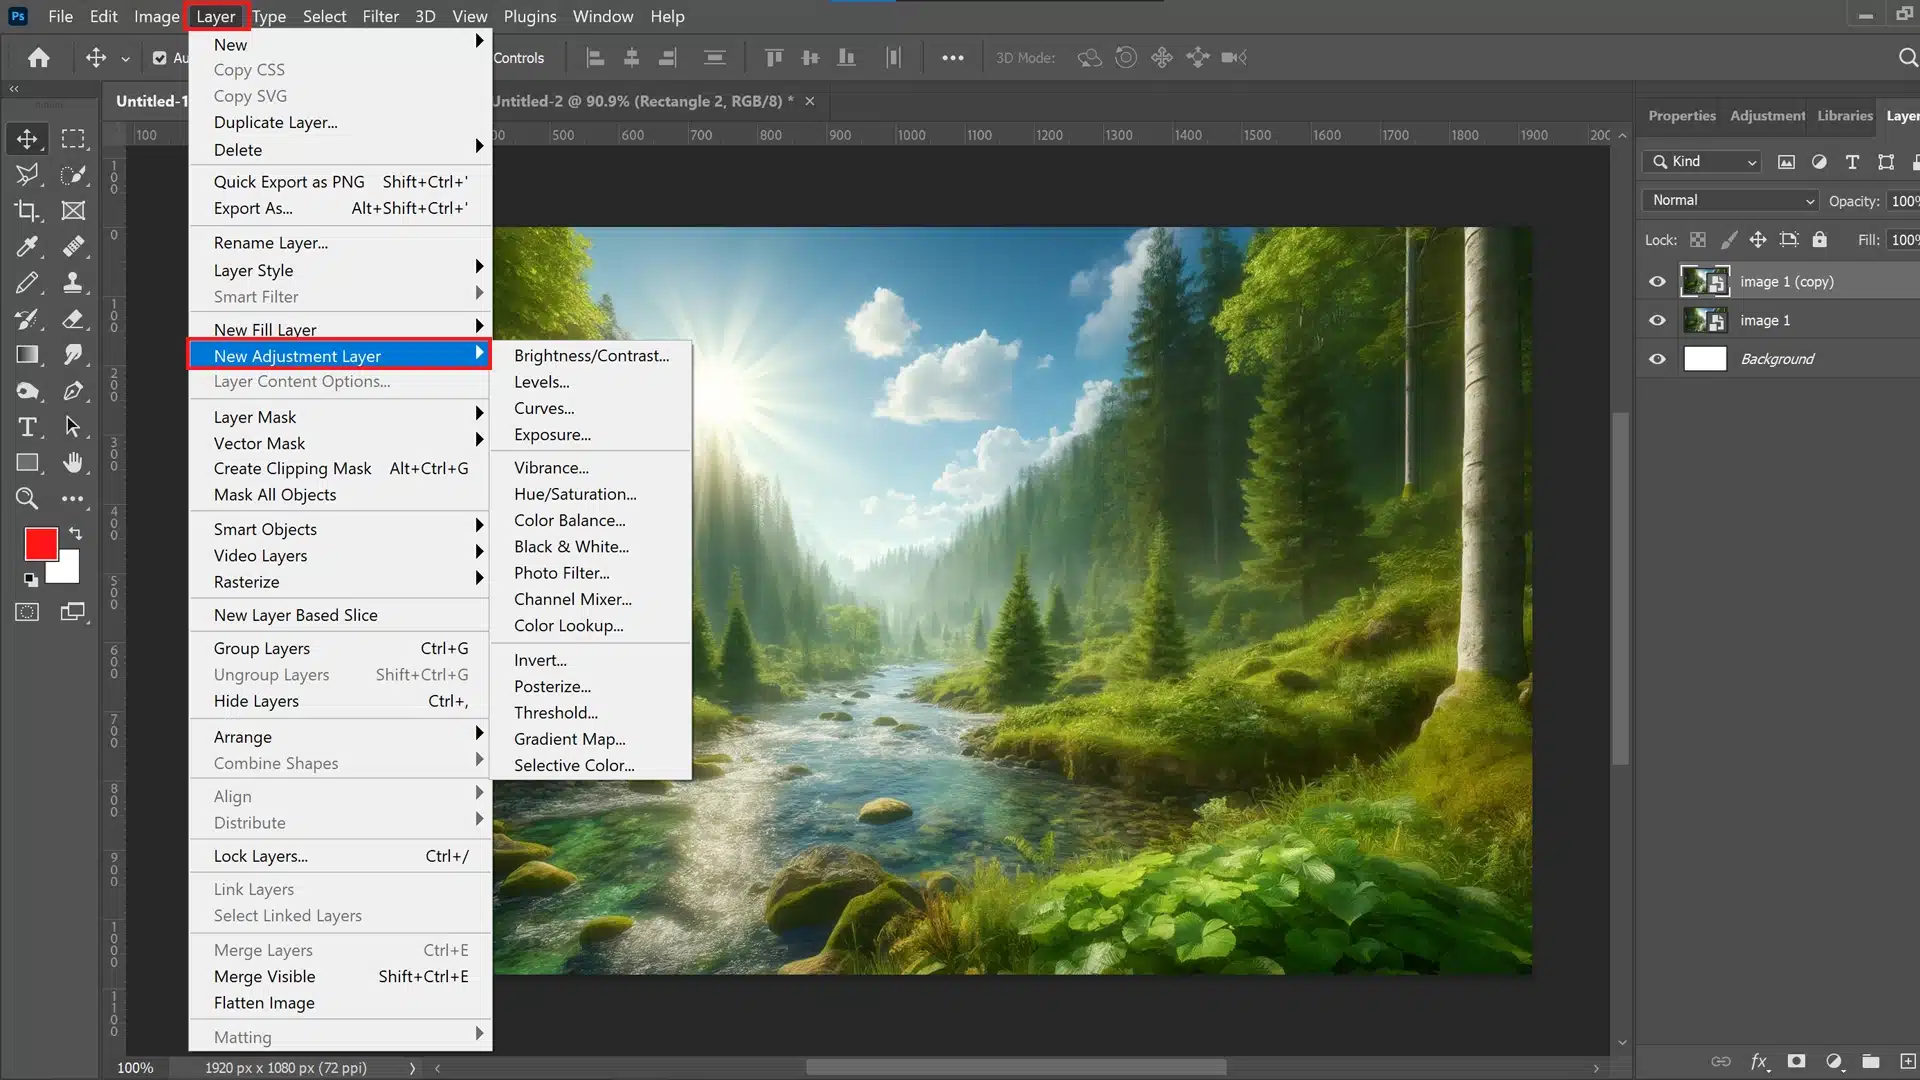 Adobe Photoshop with a serene forest landscape displayed on the canvas. The 'Layer' dropdown menu is open, and 'New Adjustment Layer' is highlighted with the sub-menu visible.